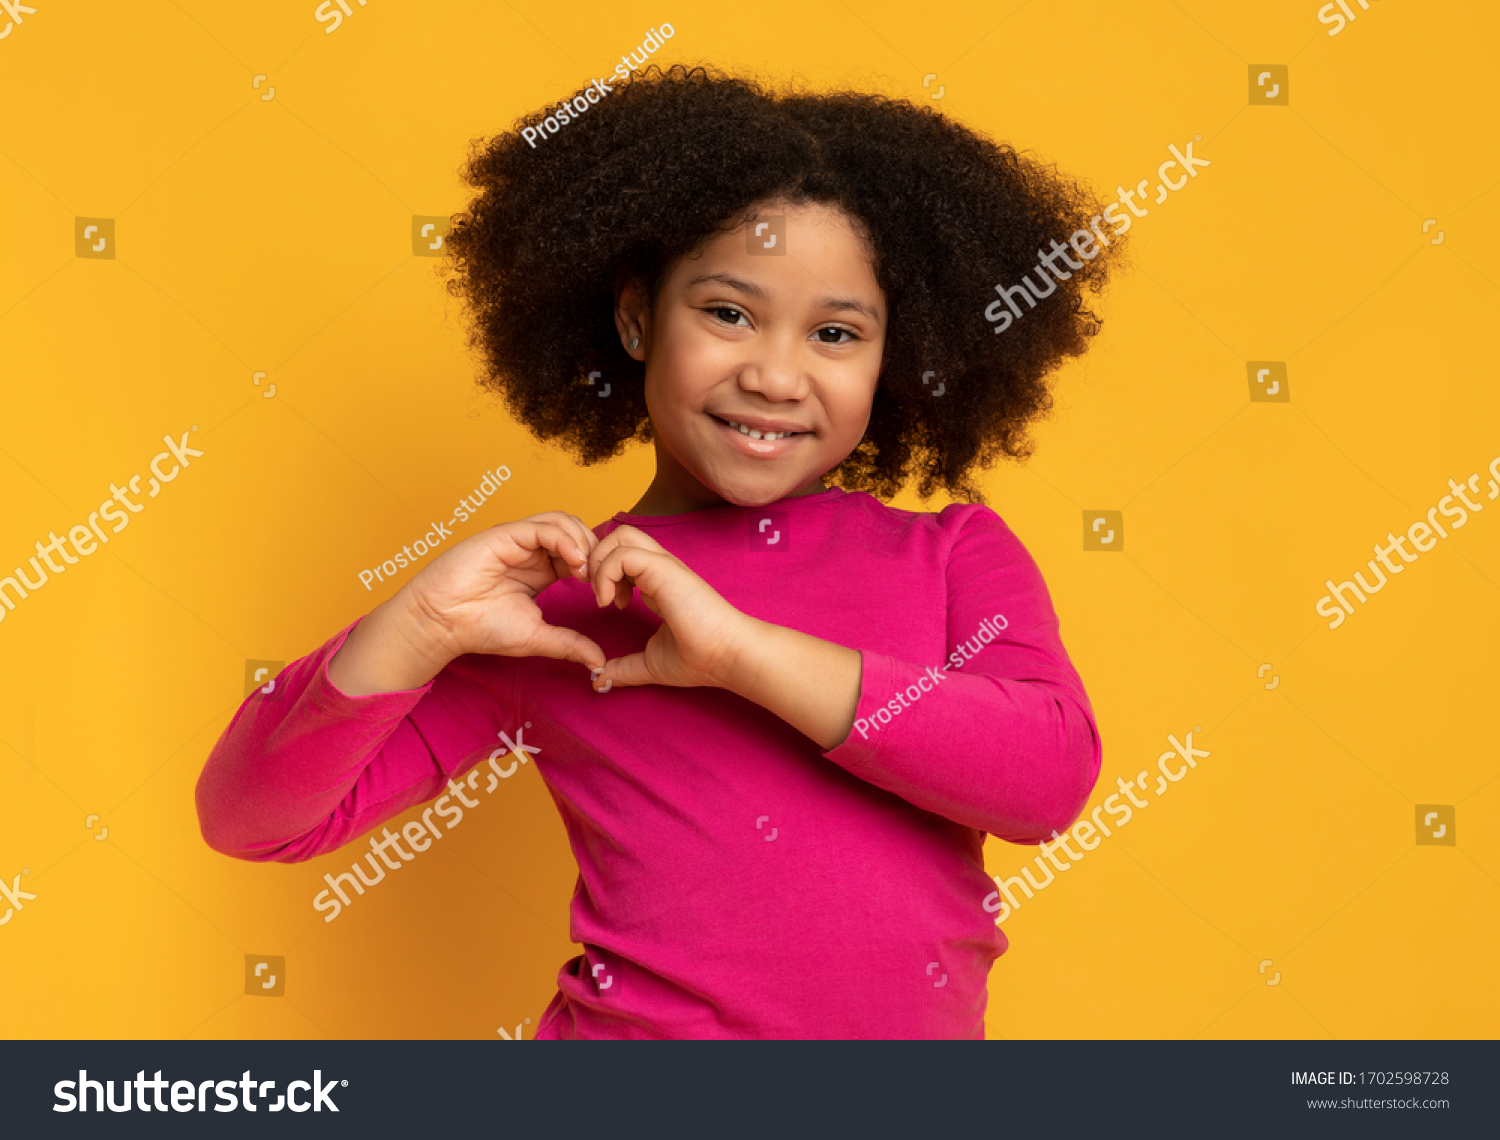 Cute little african american girl making heart shape with her hands and smiling to camera, posing over yellow background in studio, empty space #1702598728